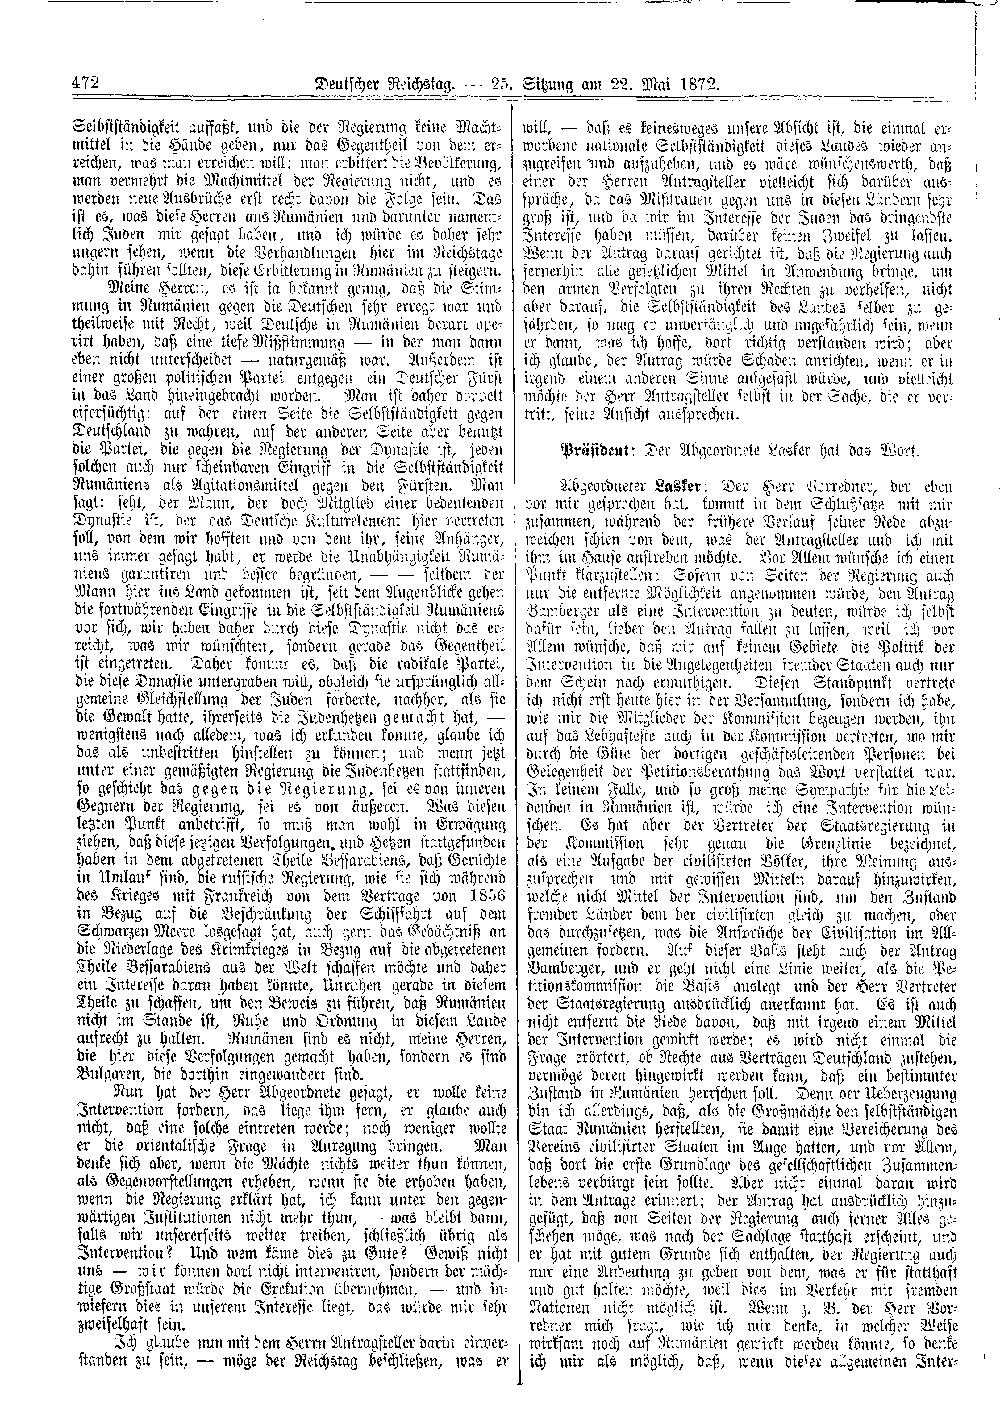 Scan of page 472